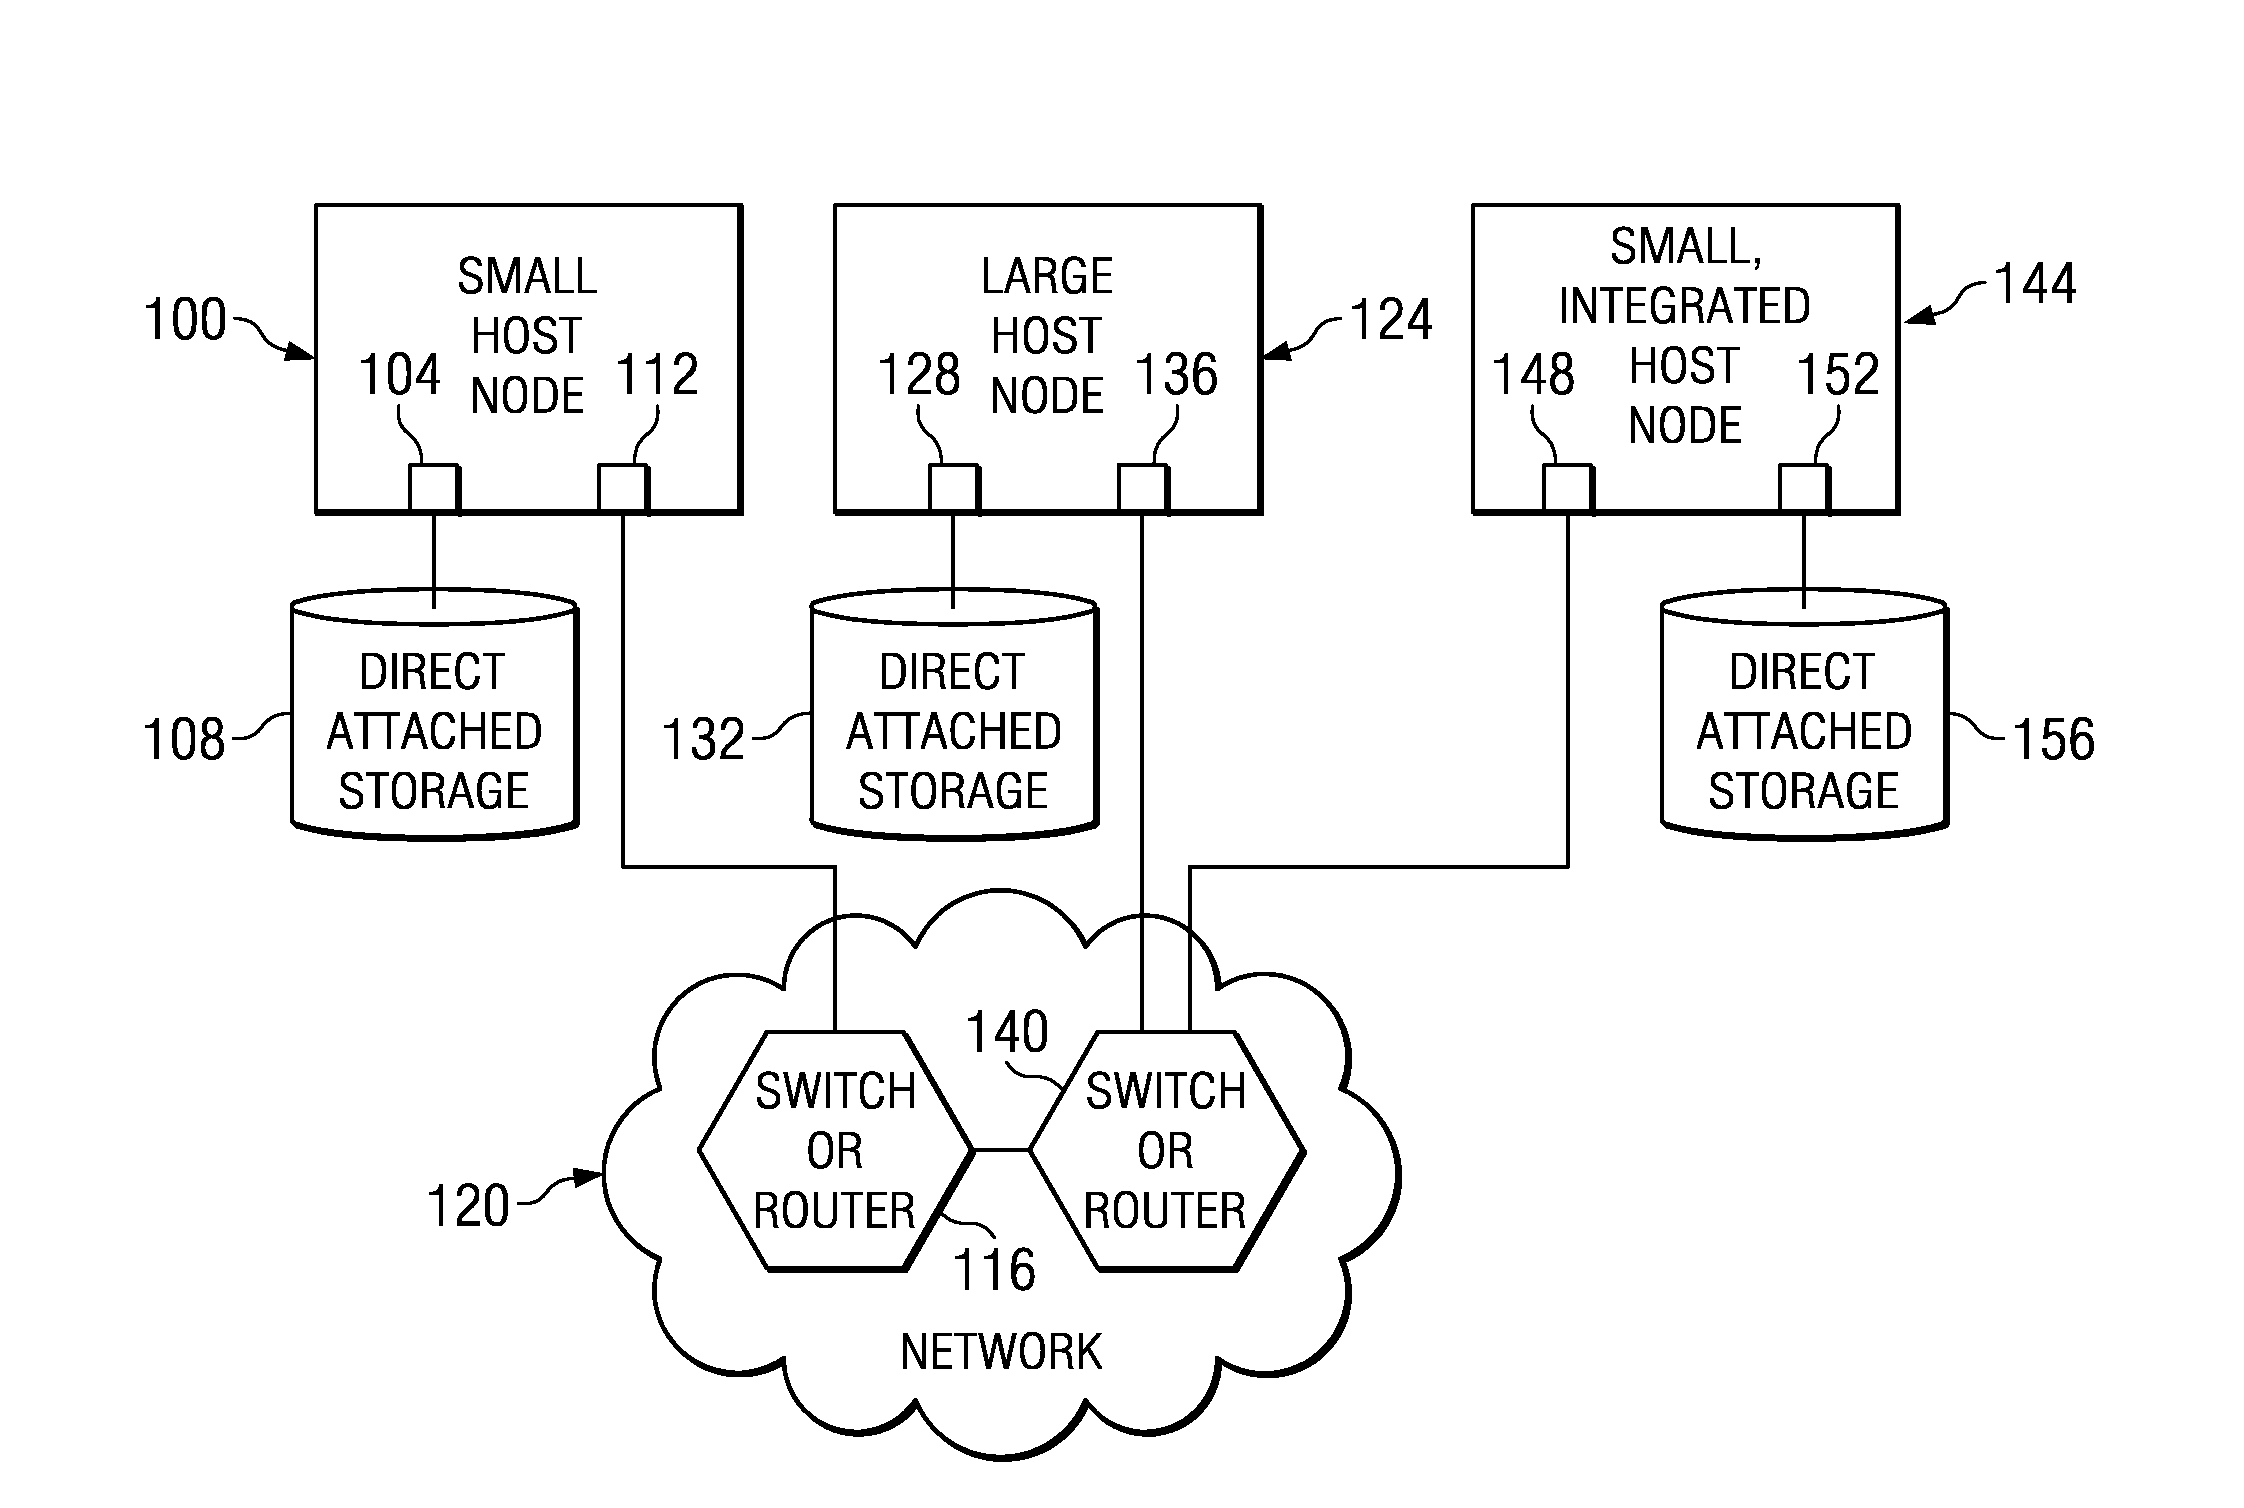 Association of memory access through protection attributes that are associated to an access control level on a PCI adapter that supports virtualization